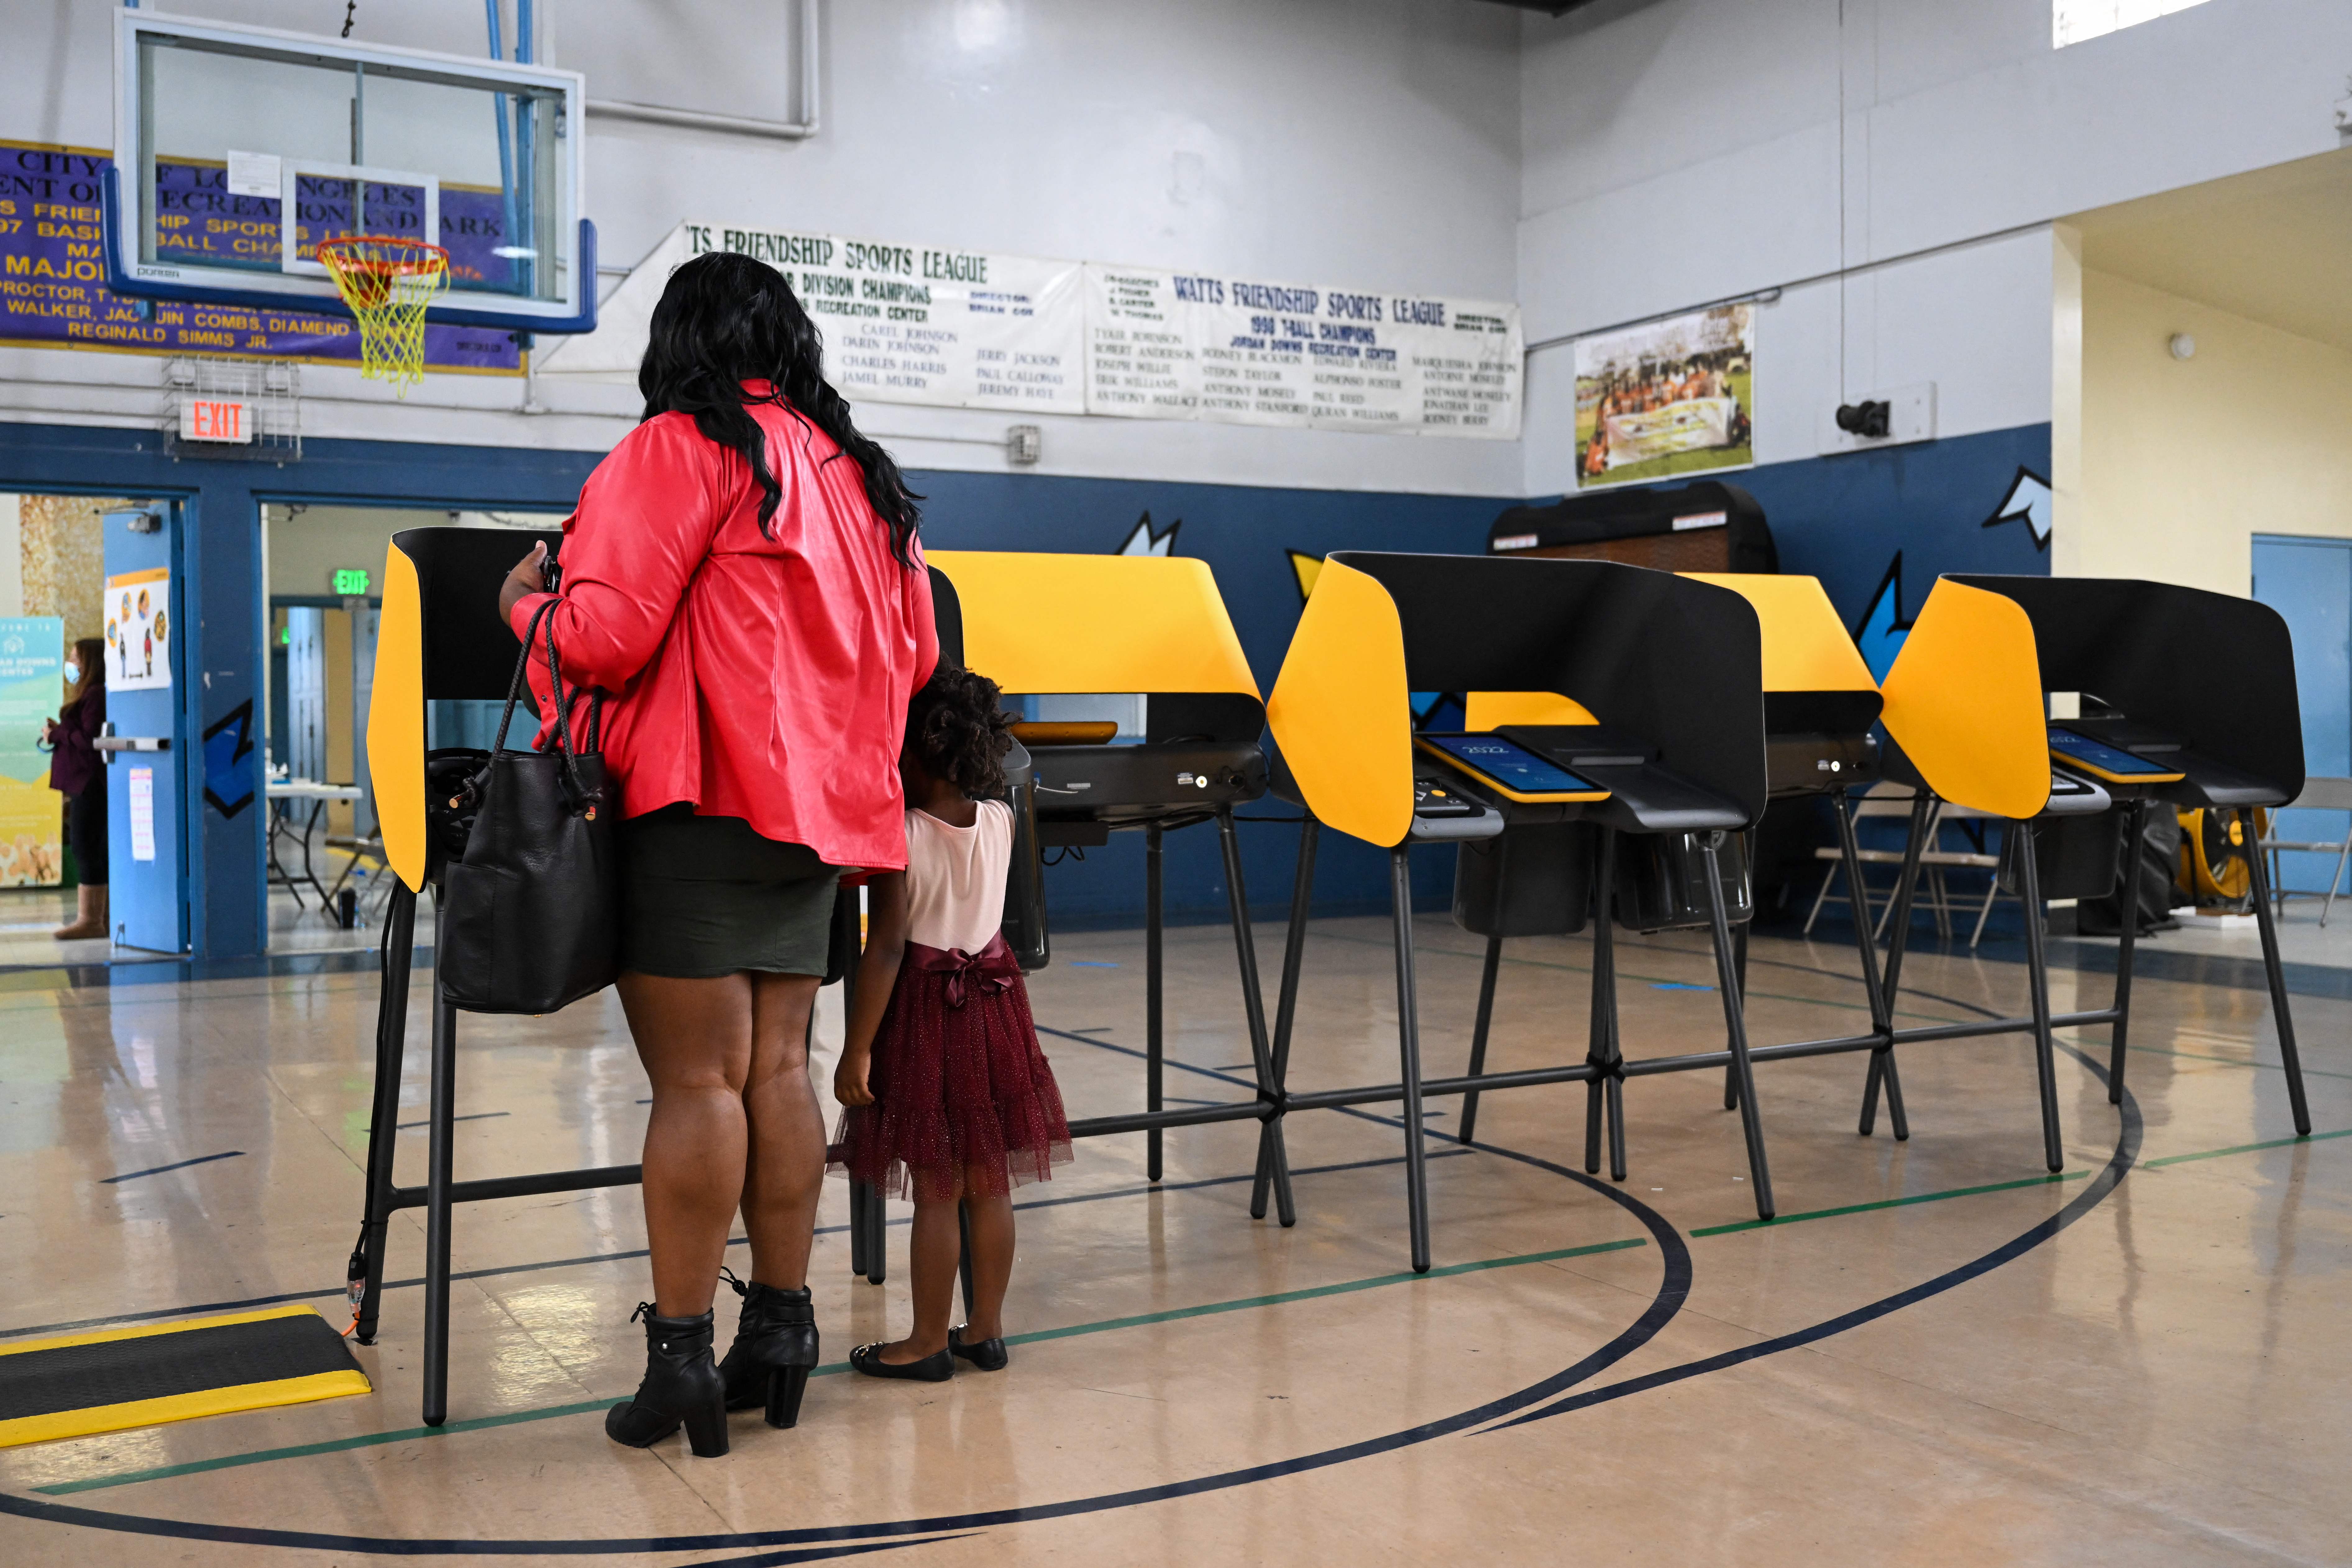 A person votes with a young child in US midterm elections inside a vote center at the Jordan Downs Recreation Center in Los Angeles, California on November 8, 2022. (Photo by Patrick T. FALLON / AFP) (Photo by PATRICK T. FALLON/AFP via Getty Images)